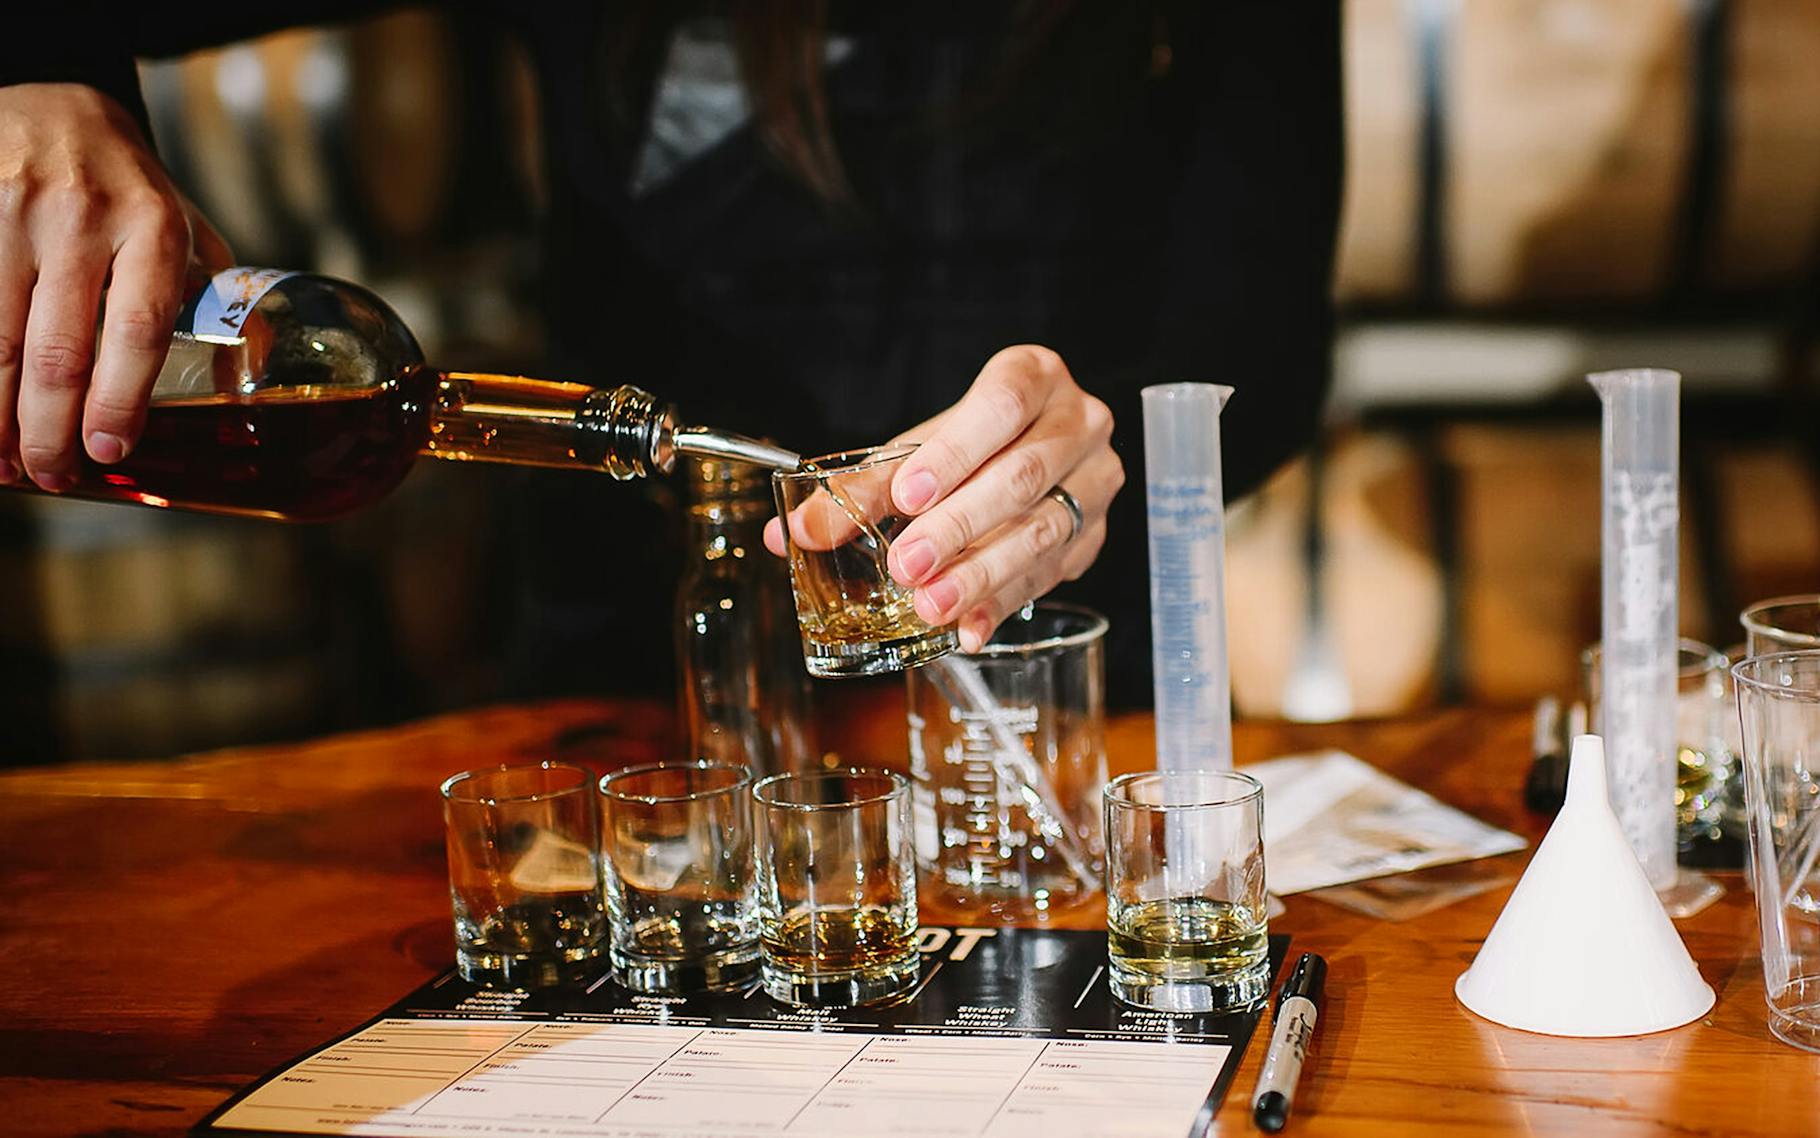 A Whiskey Drinker's Guide to the Craft Distilleries of DallasFort